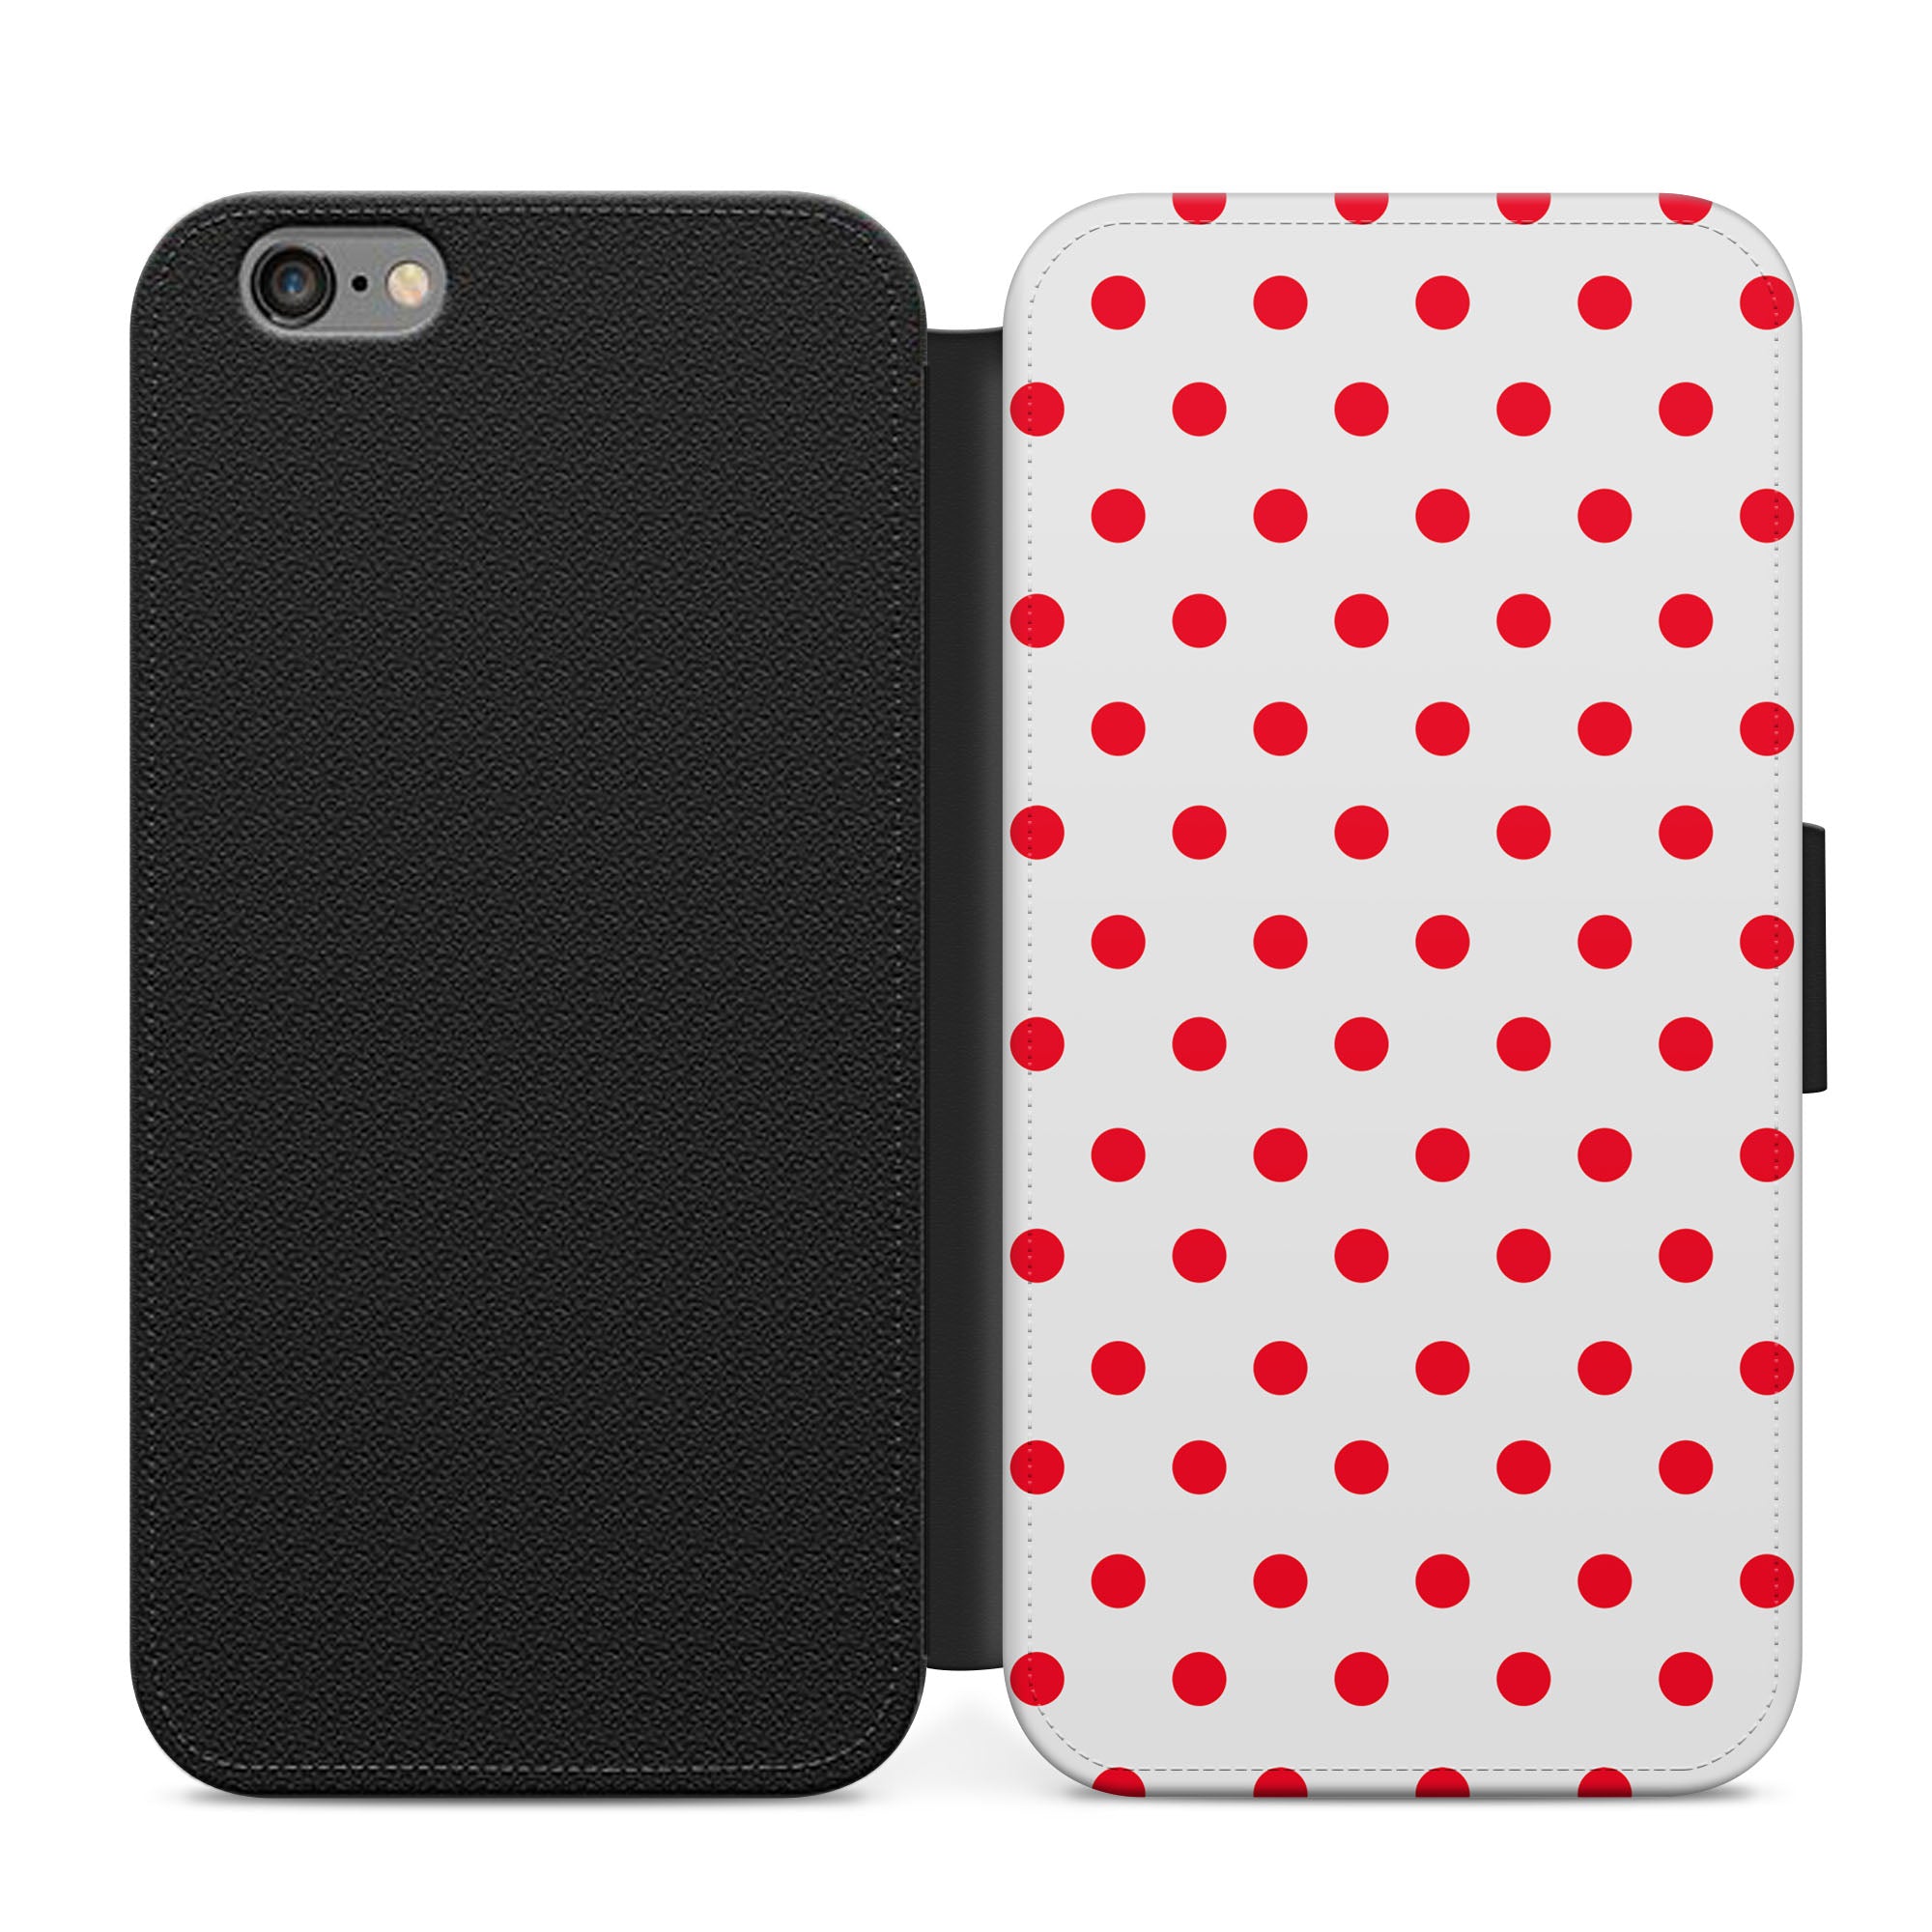 Red & White Polka Dots Faux Leather Flip Case Wallet for iPhone / Samsung